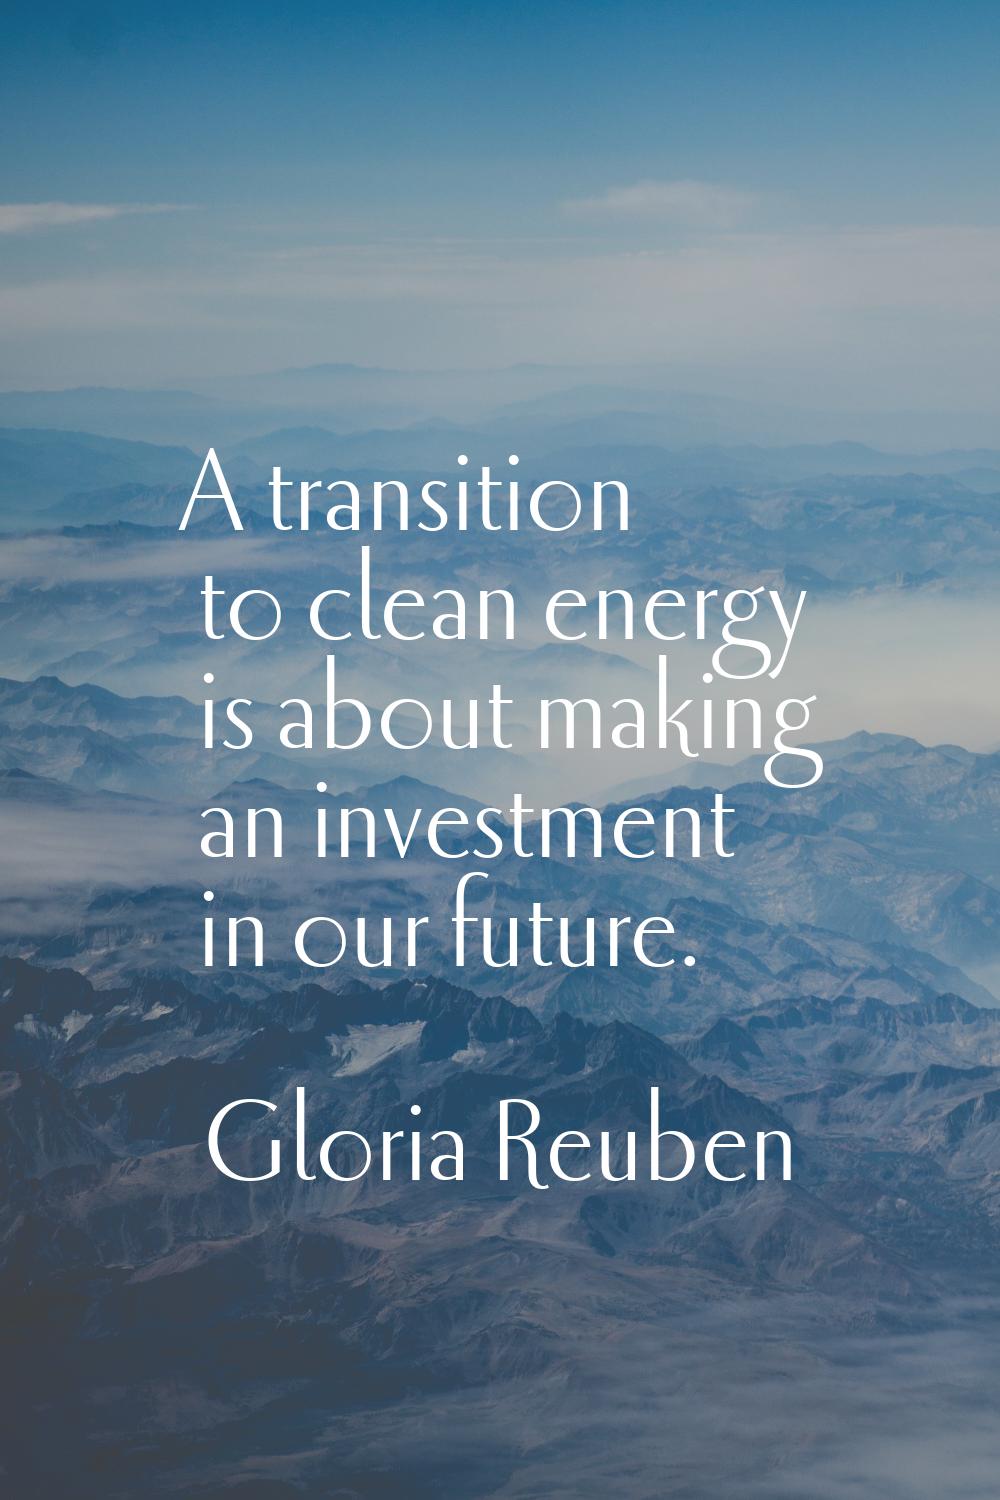 A transition to clean energy is about making an investment in our future.